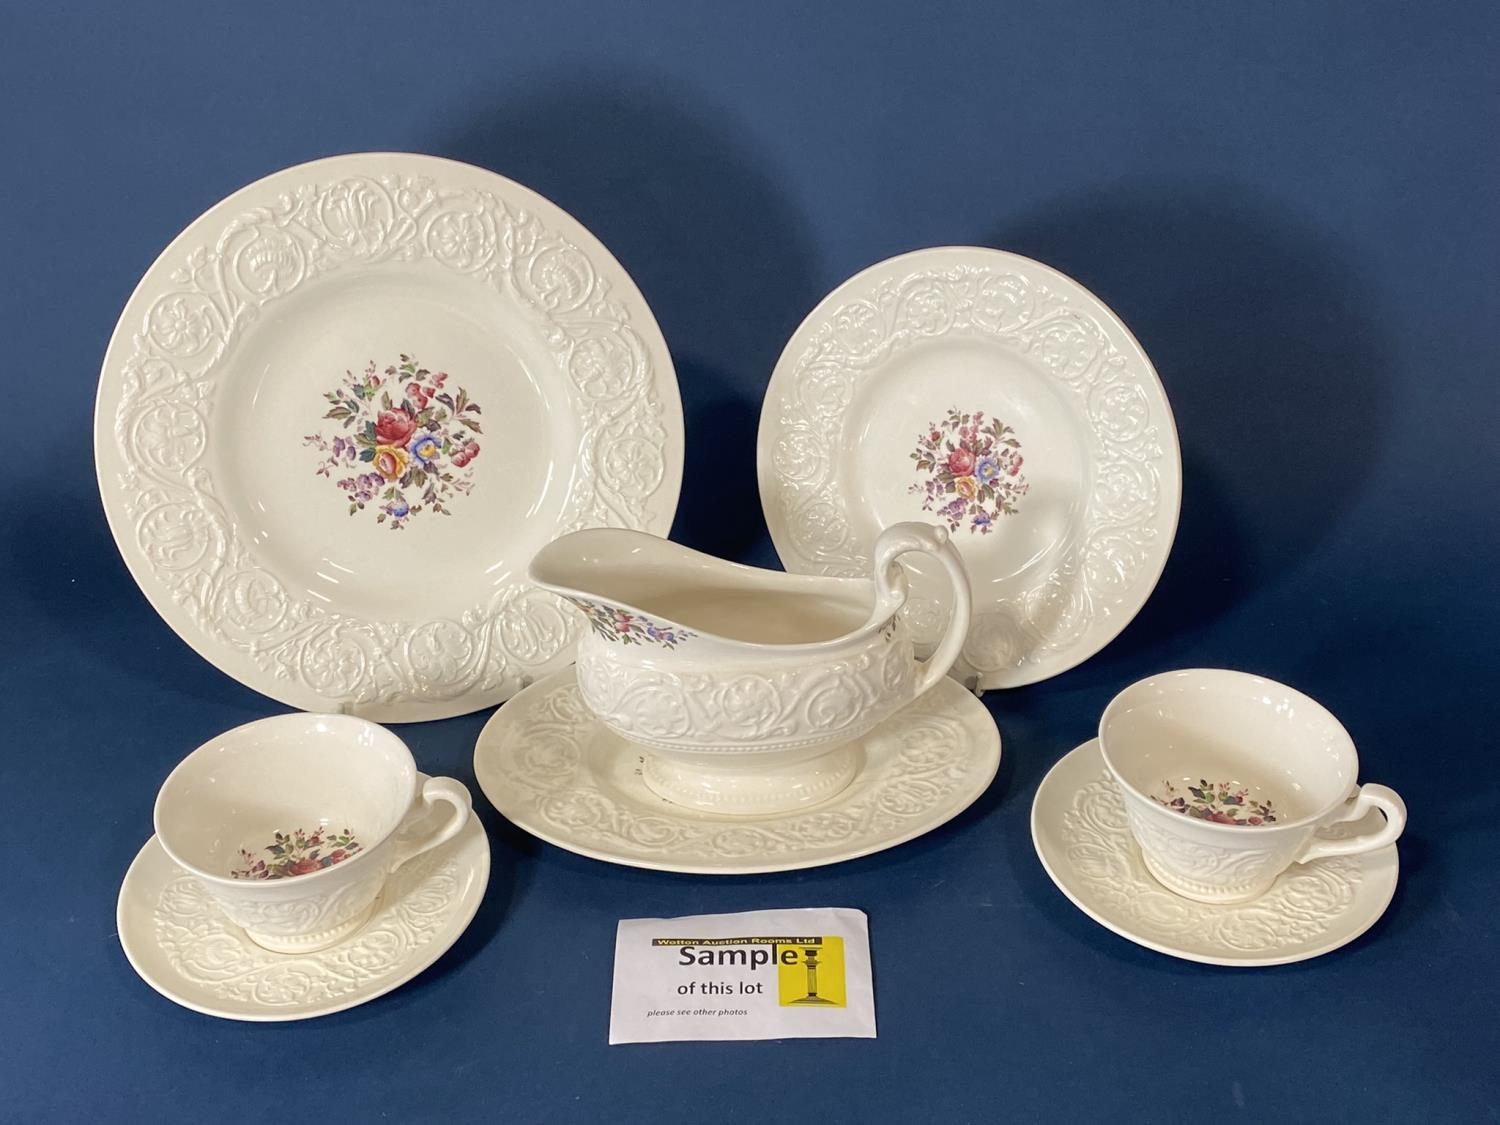 A collection of Wedgwood Patrician-Swansea dinnerware comprising dinner plates, side plates, soup